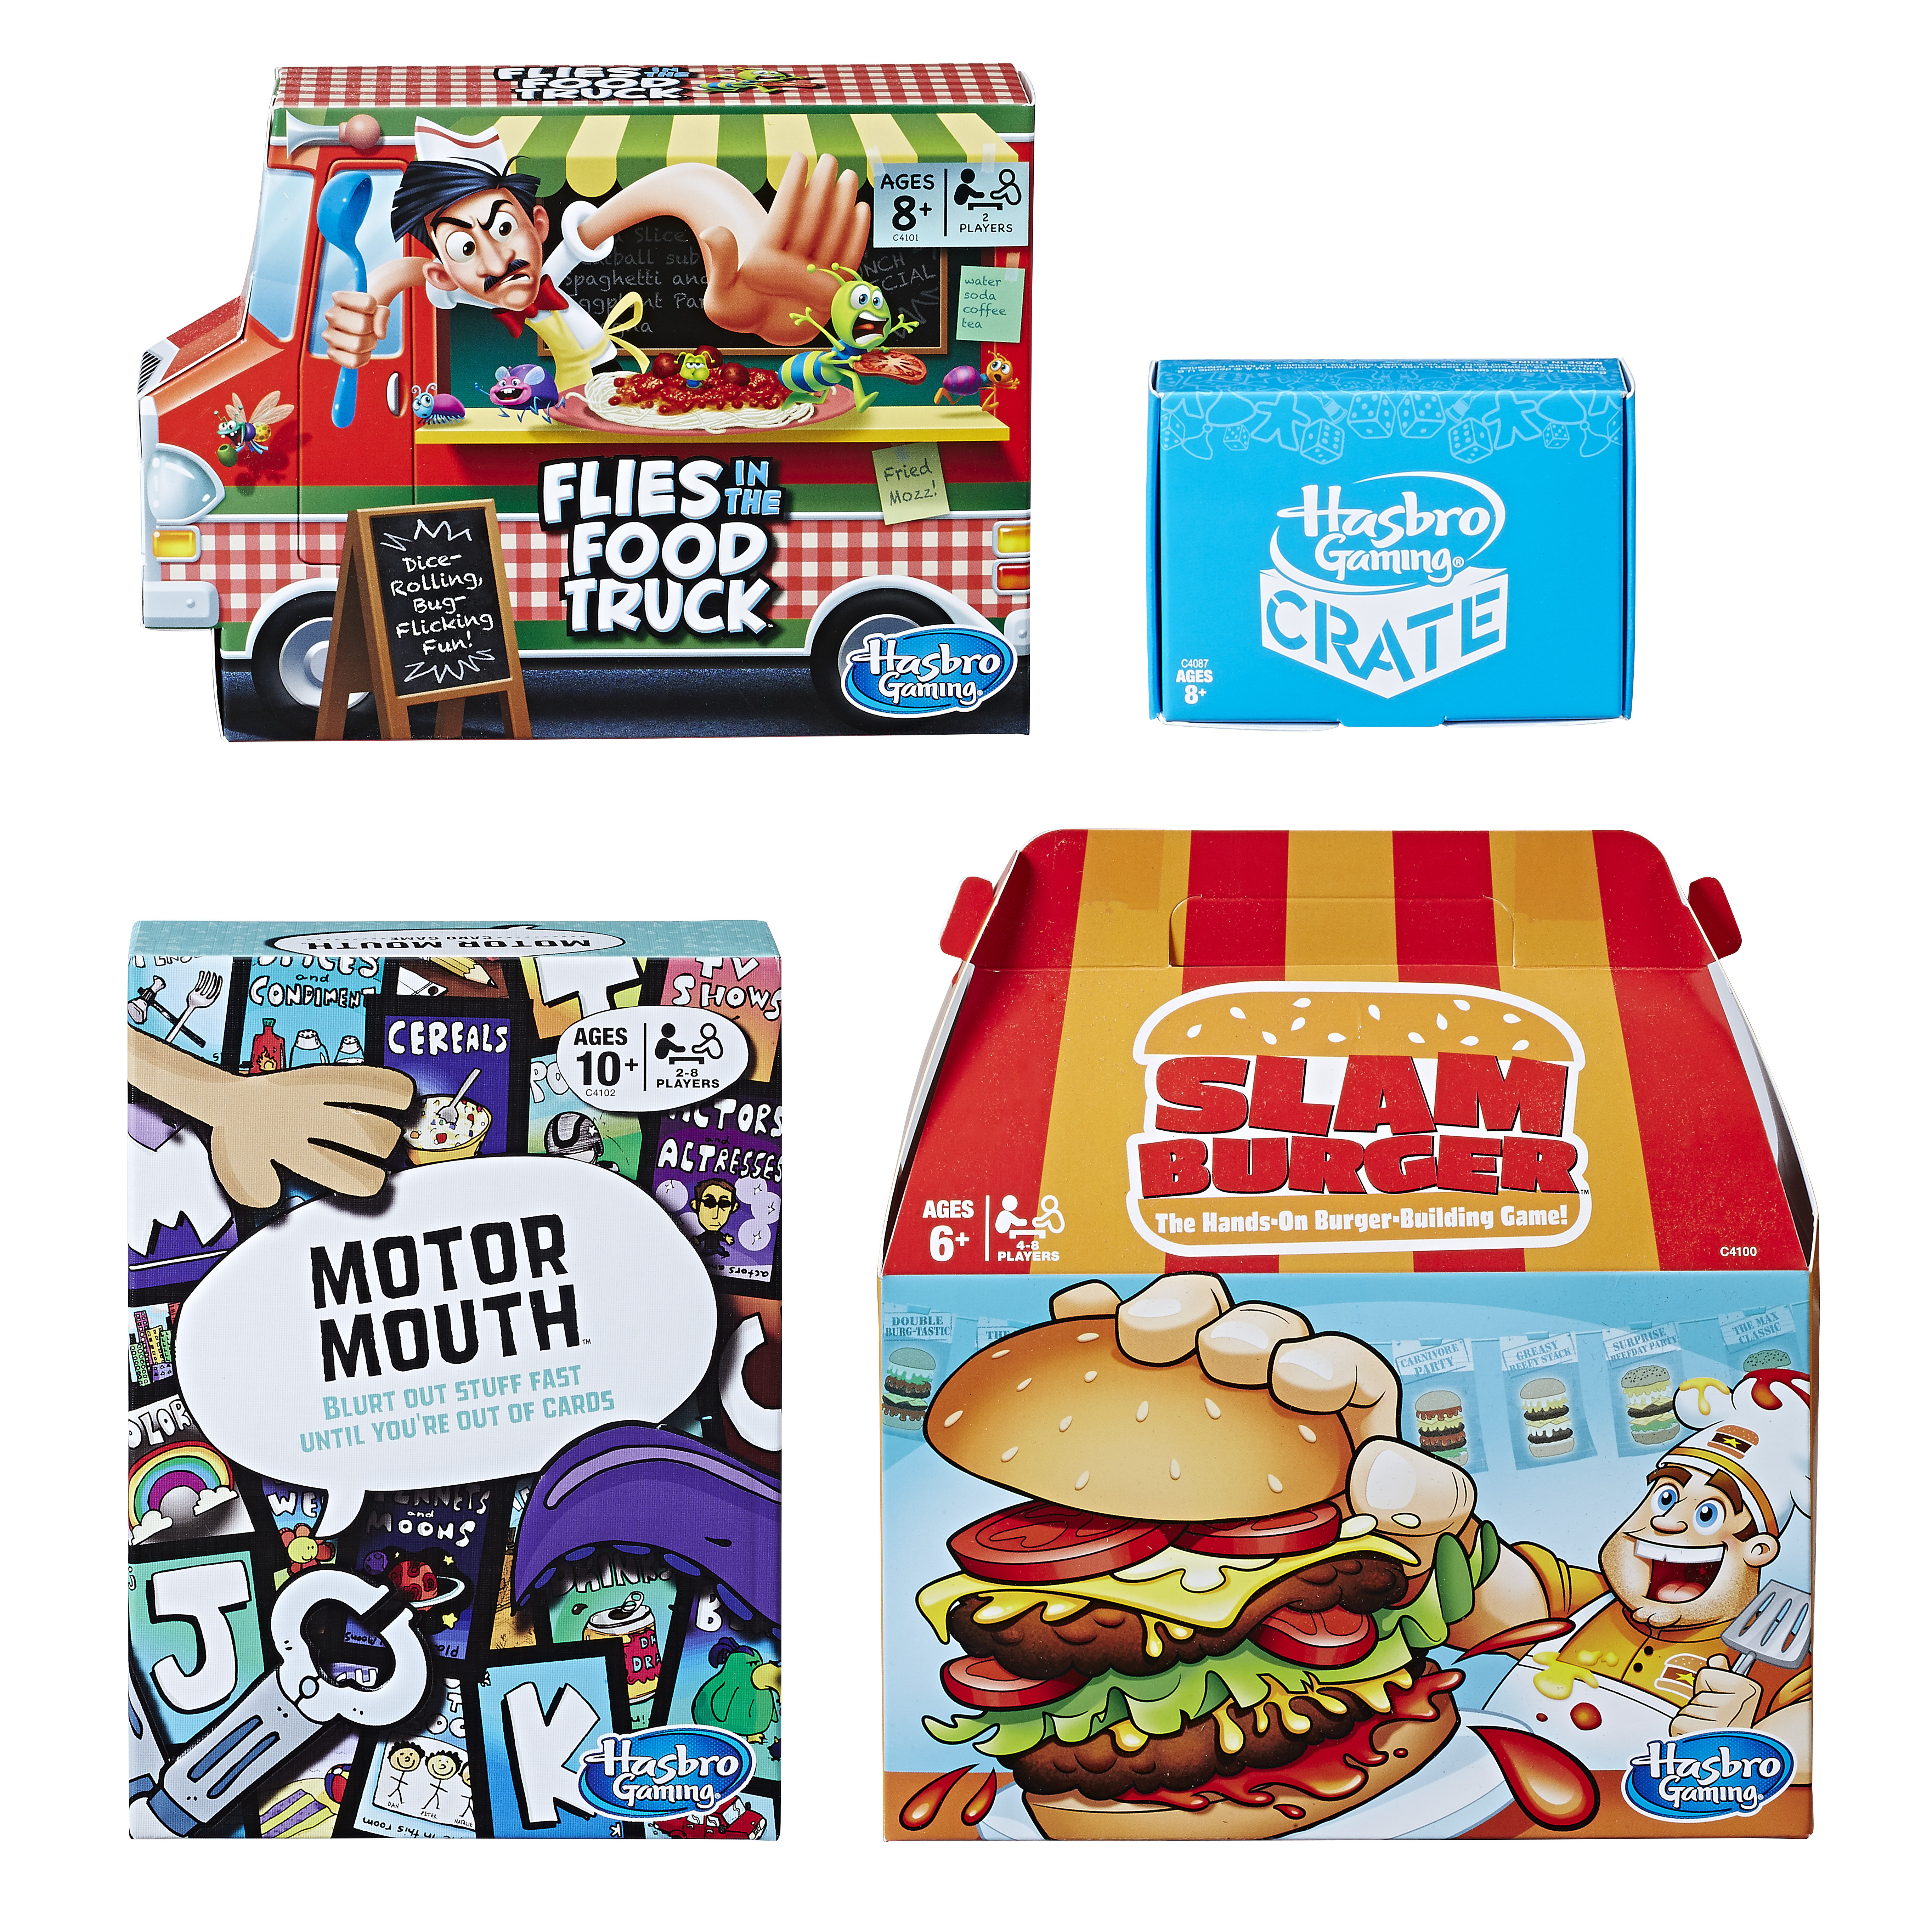 Hasbro Game crate subscription and a giveaway